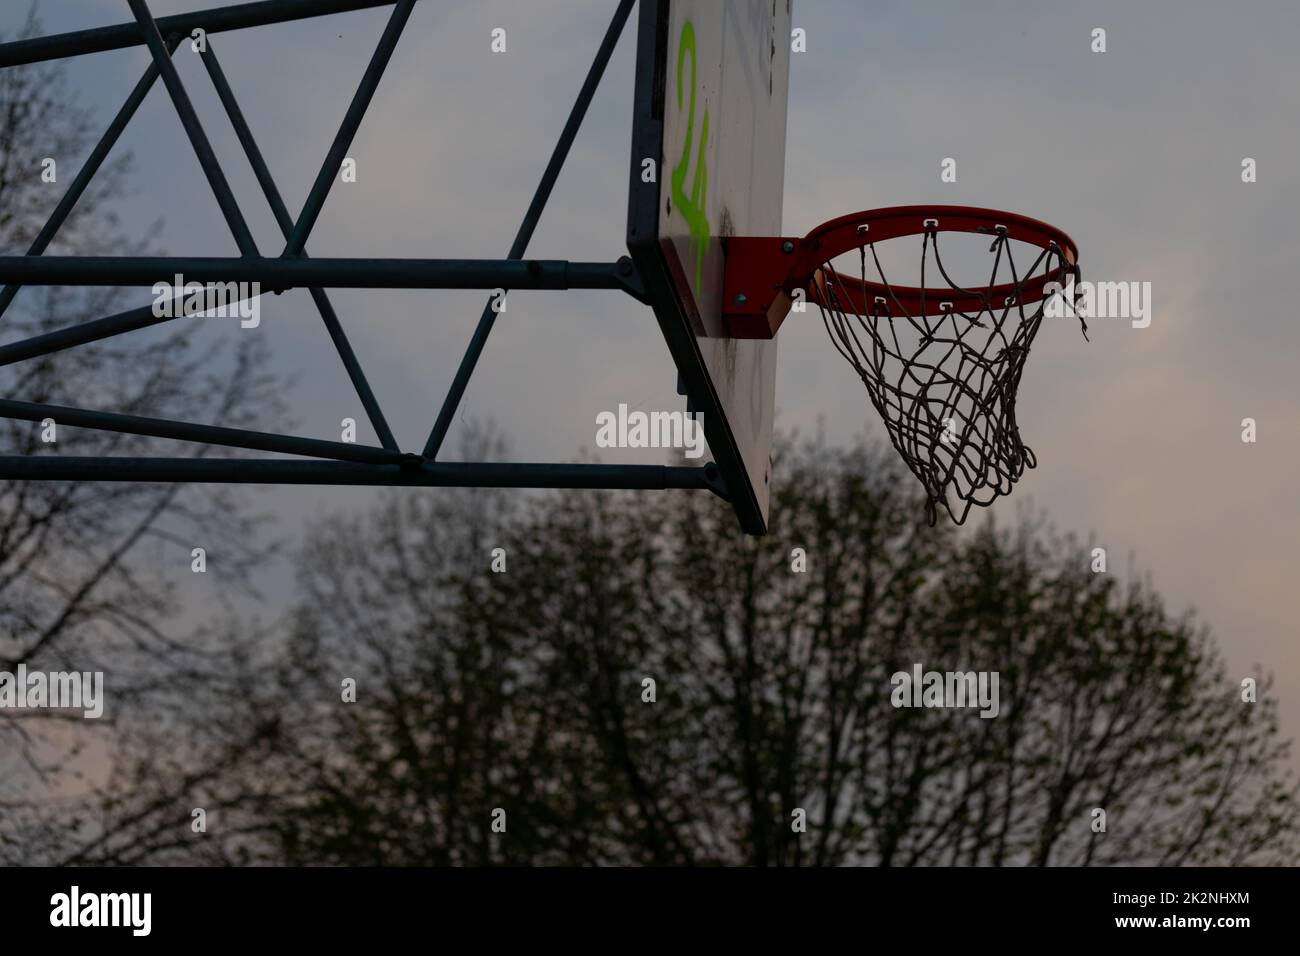 Basketball hoop and net on a goal post outdoors Stock Photo